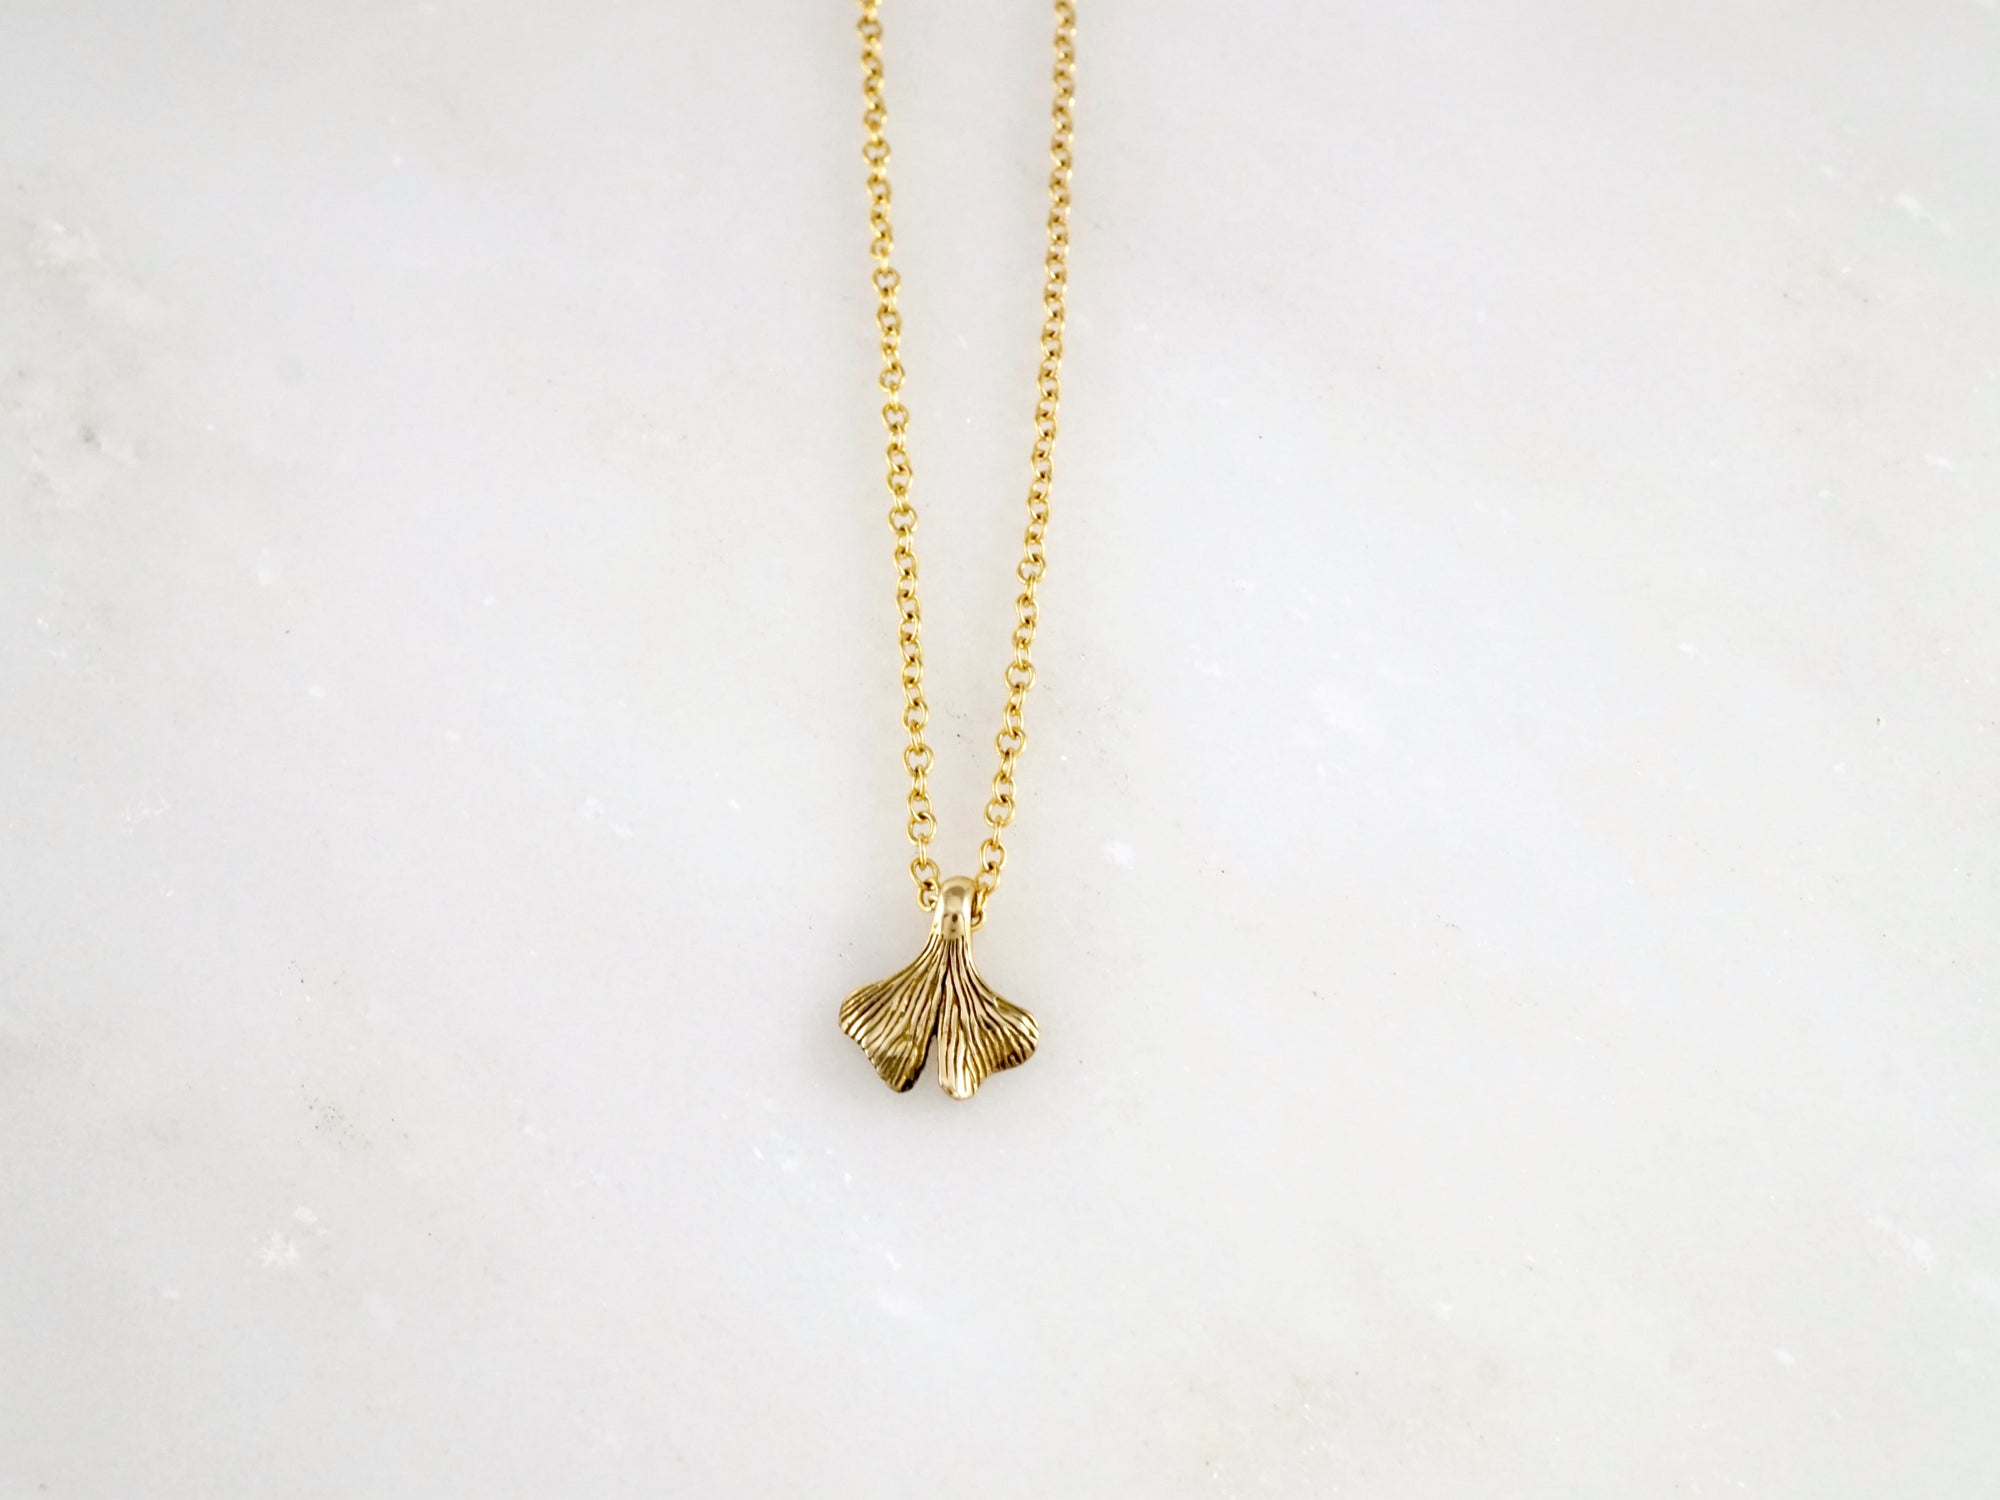 Ginkgo Necklace - Leaf pendant - Gold Filled delicate chain (B230)